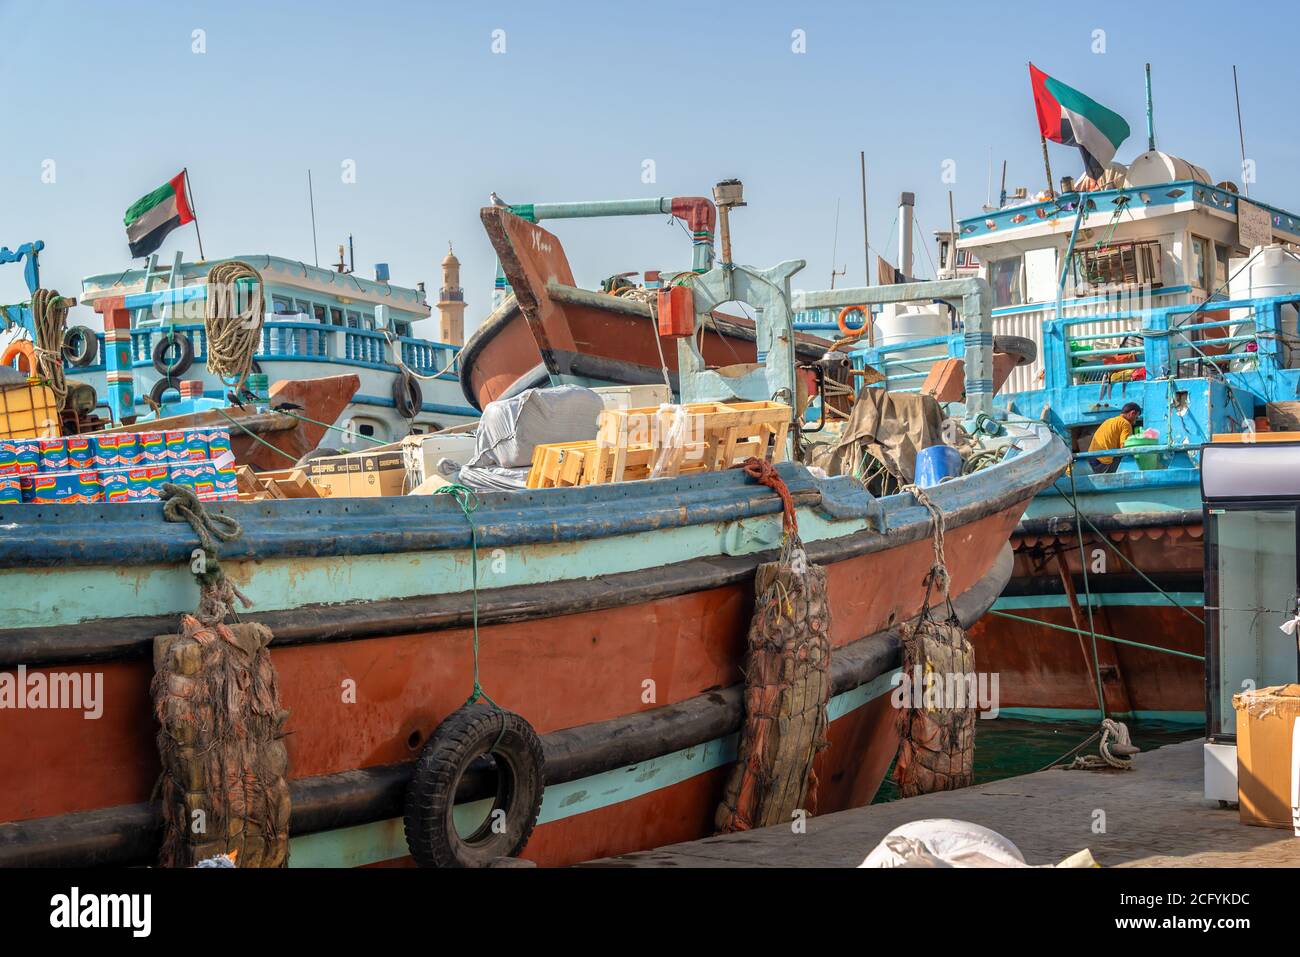 Wooden dhow cargo boats loaded with merchandise on Dubai Creek, United Arab Emirates Stock Photo